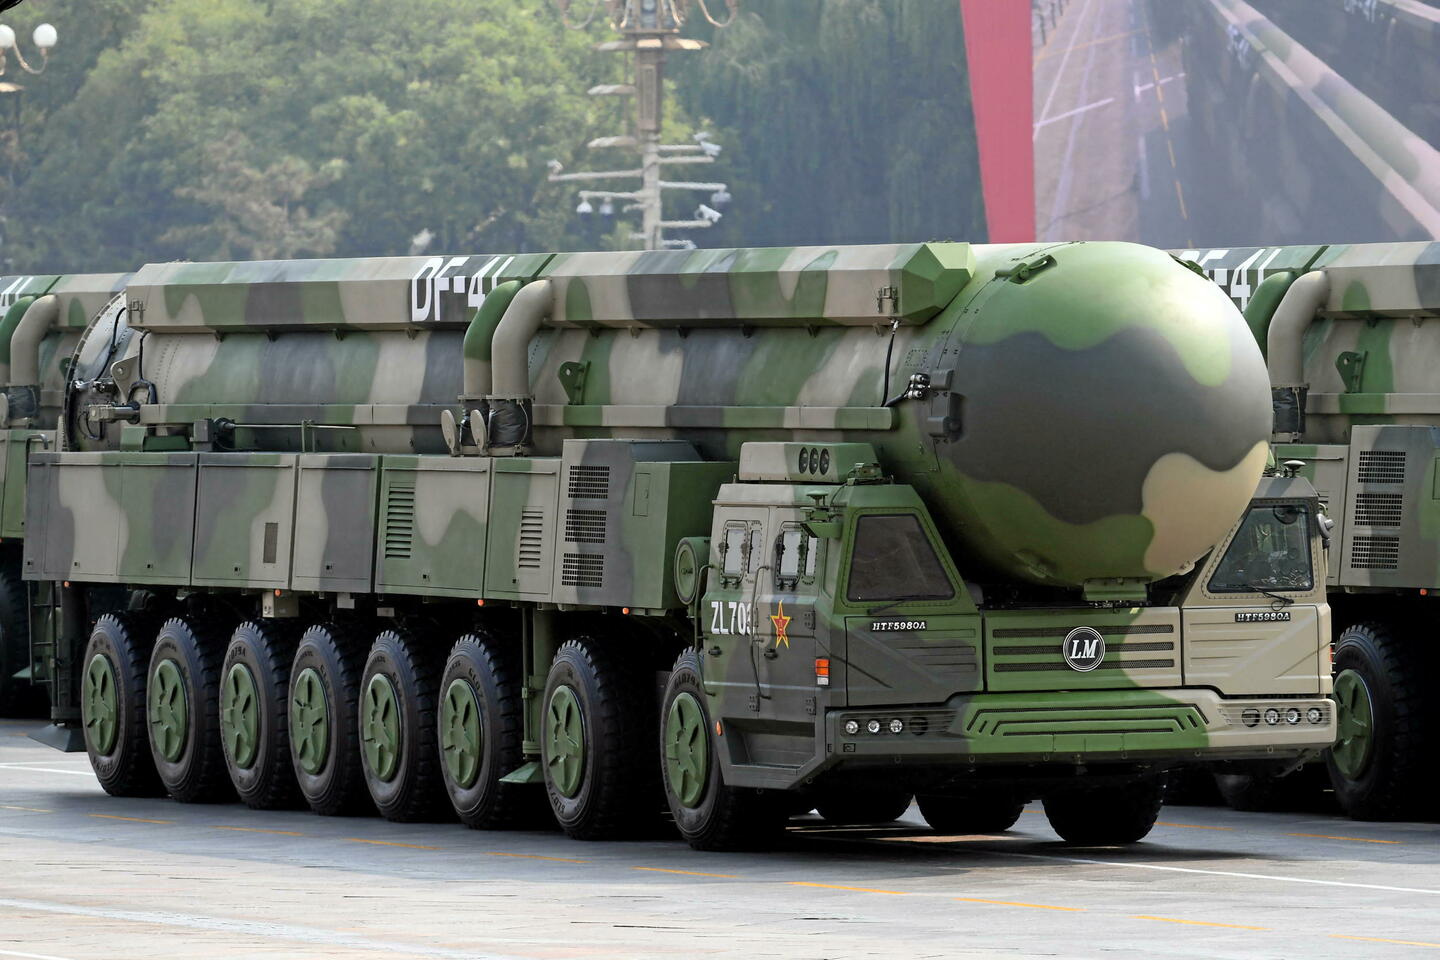 China and the US are discussing regulating their nuclear arsenals